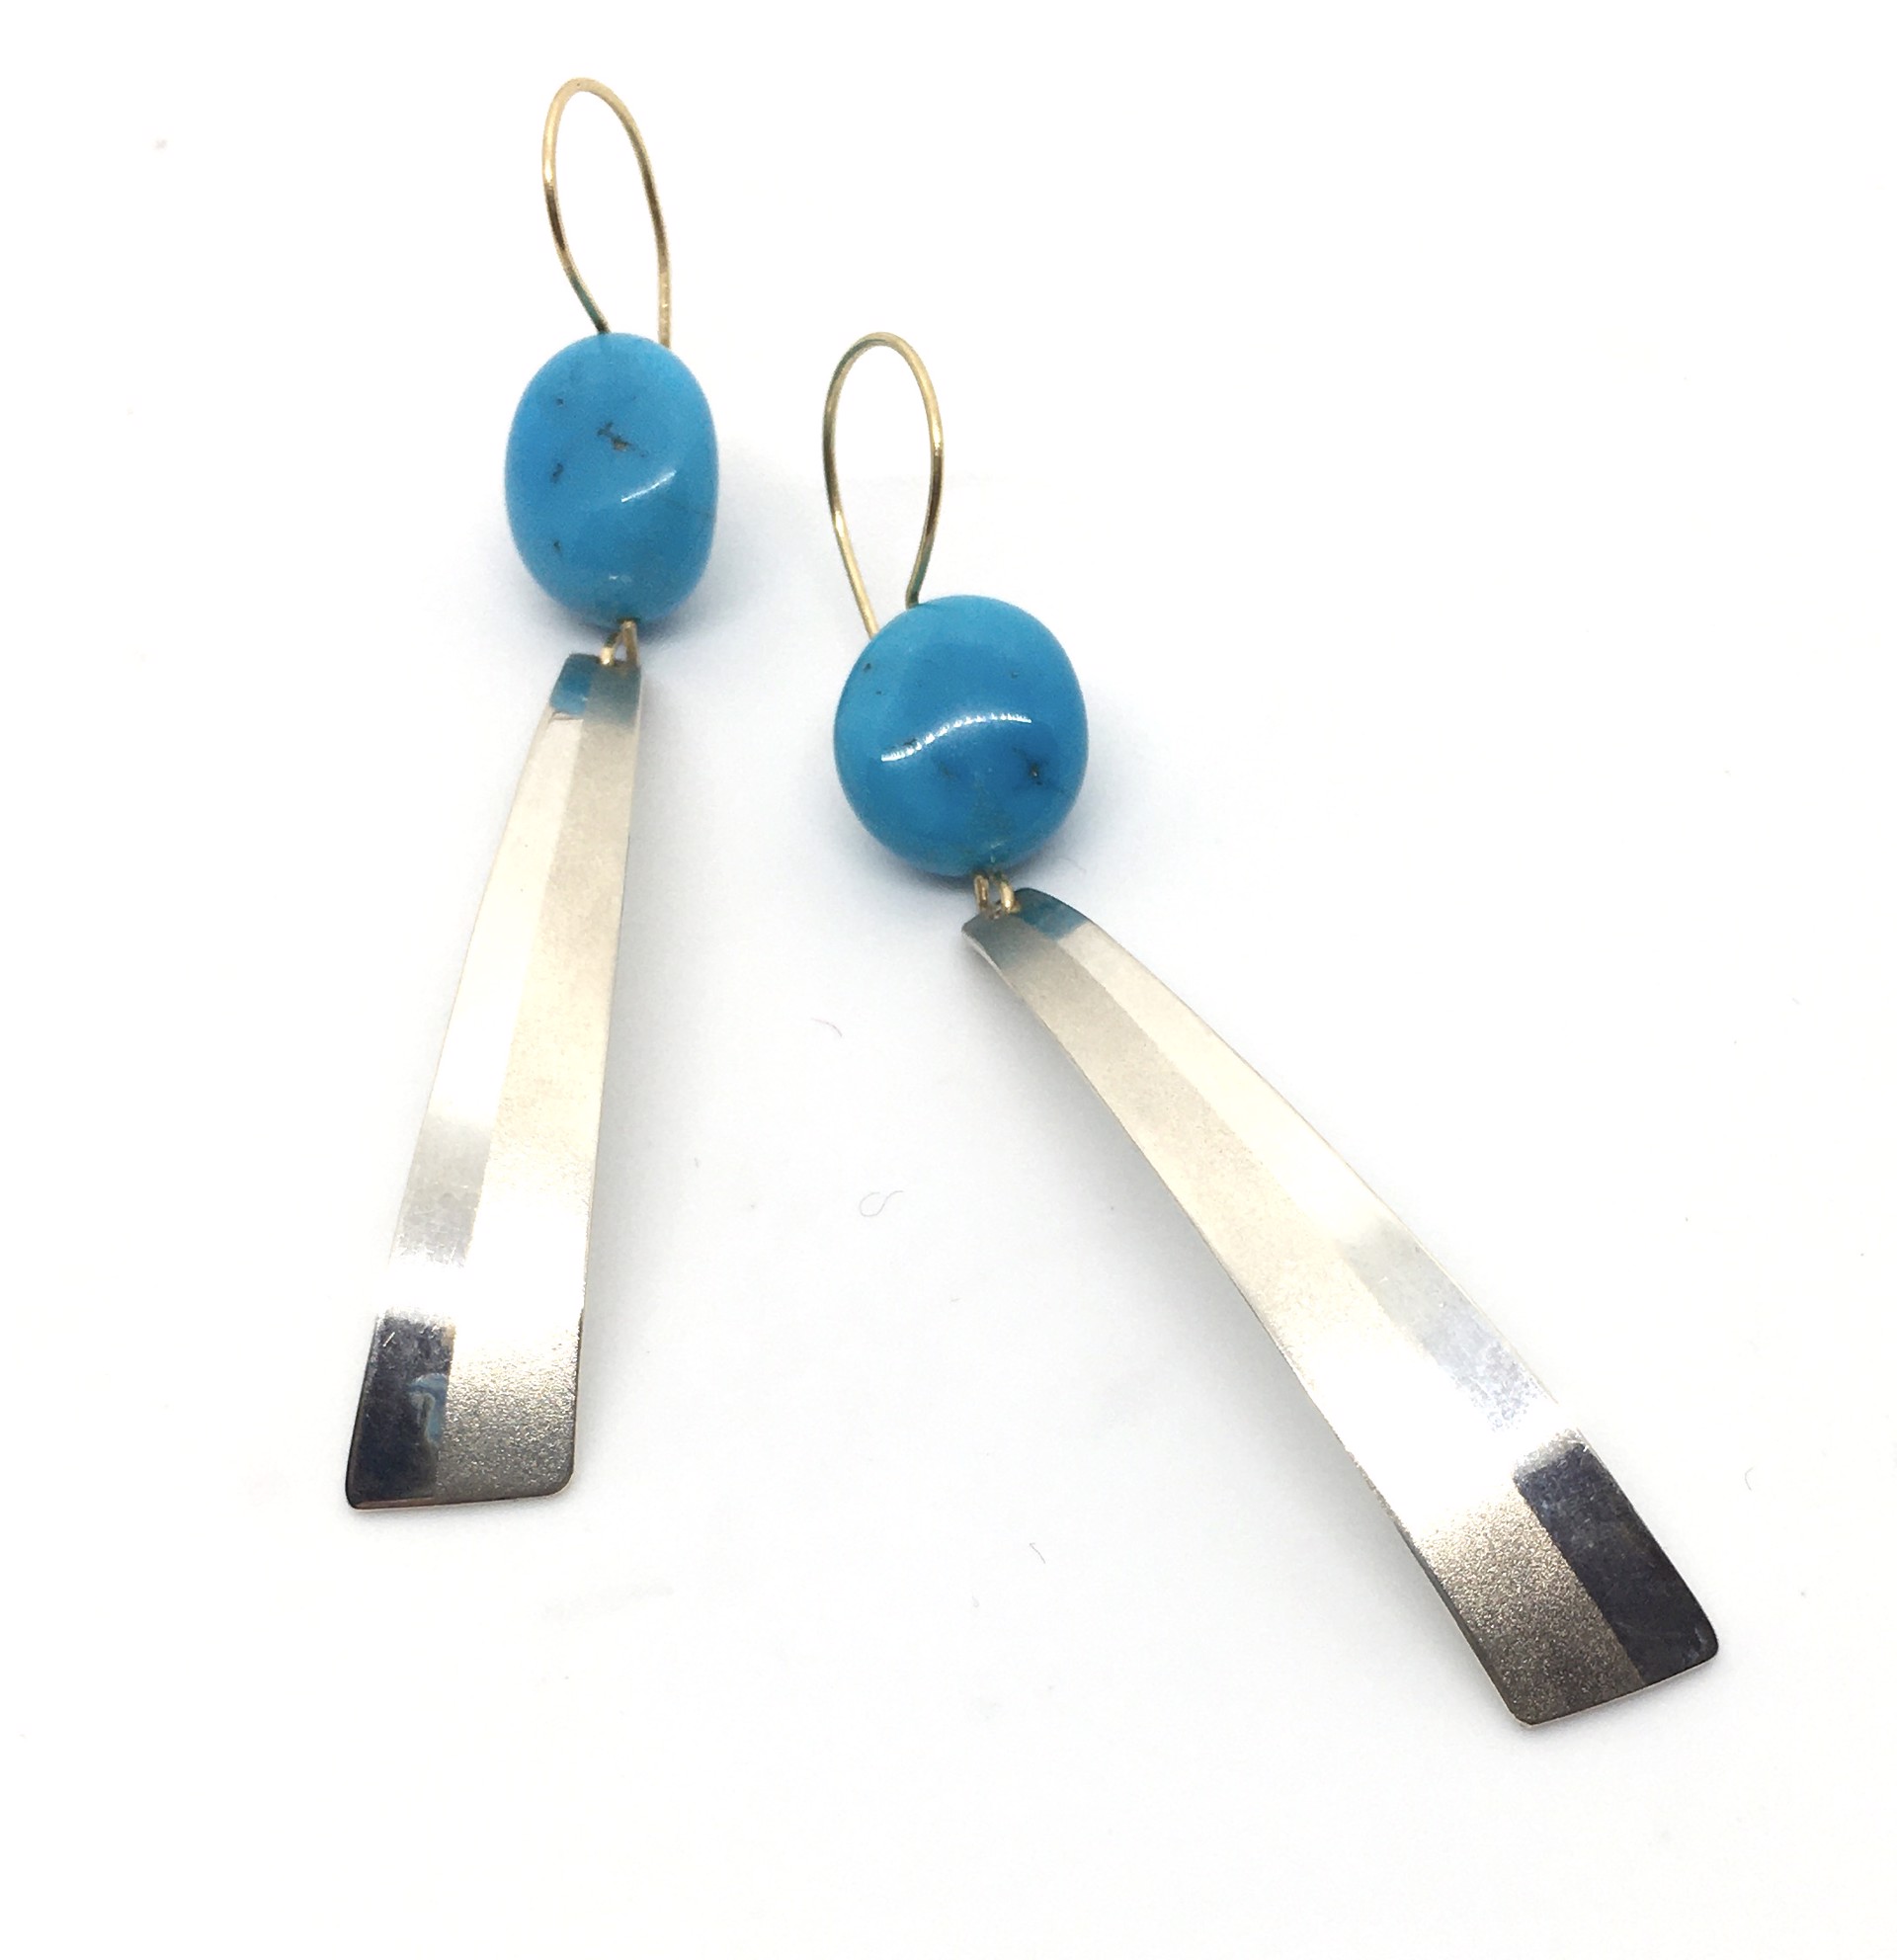 Shooting Stars Earrings with Sleeping Beauty Turquoise, Sterling, 18K Gold Earwires by Celest Michelotti